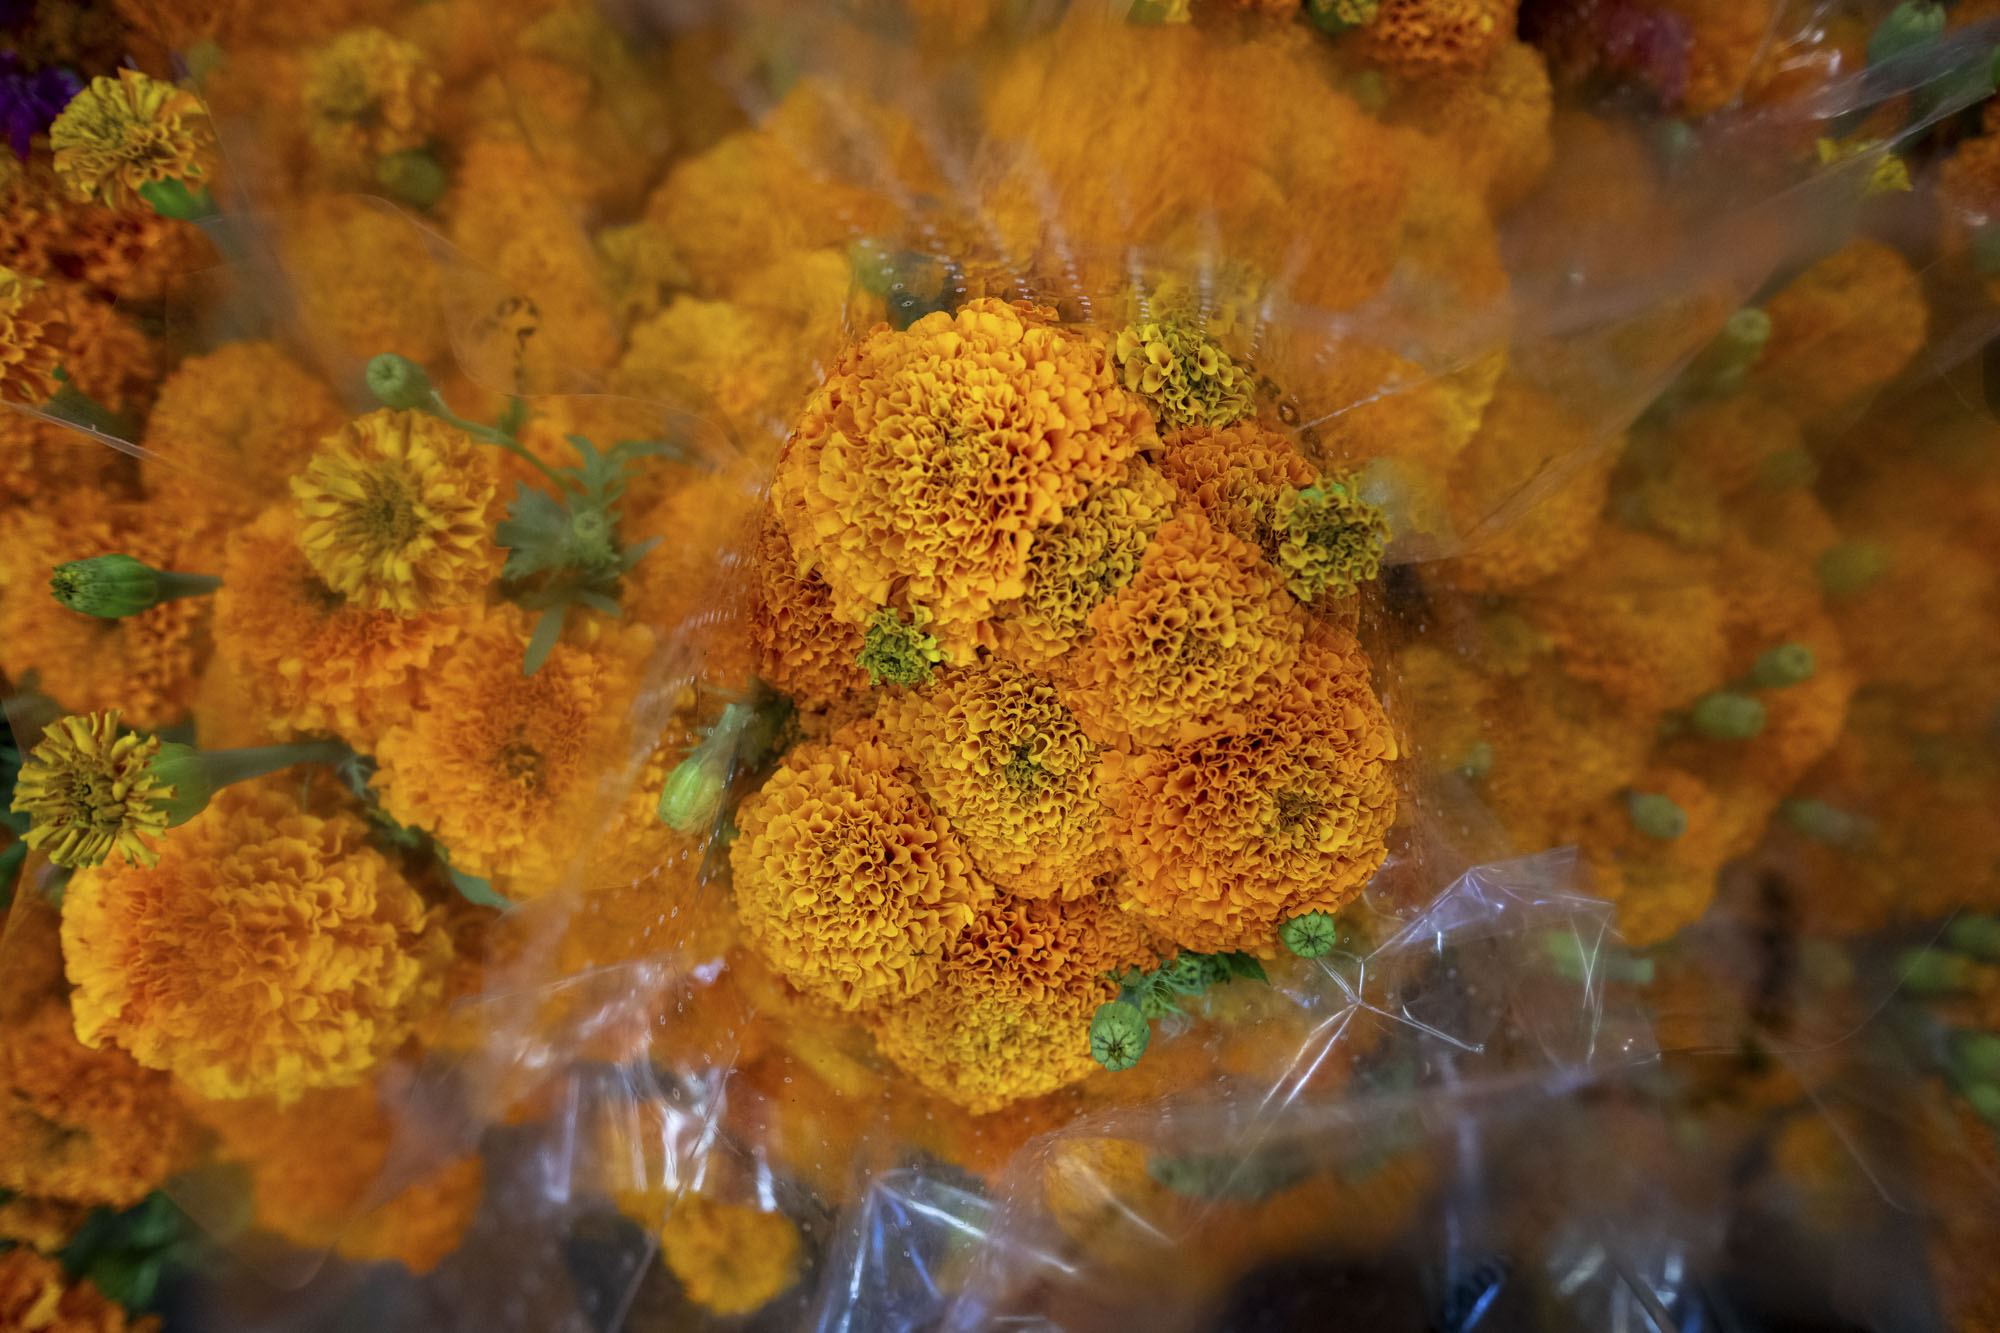 Bunches of marigolds in plastic wrapping.